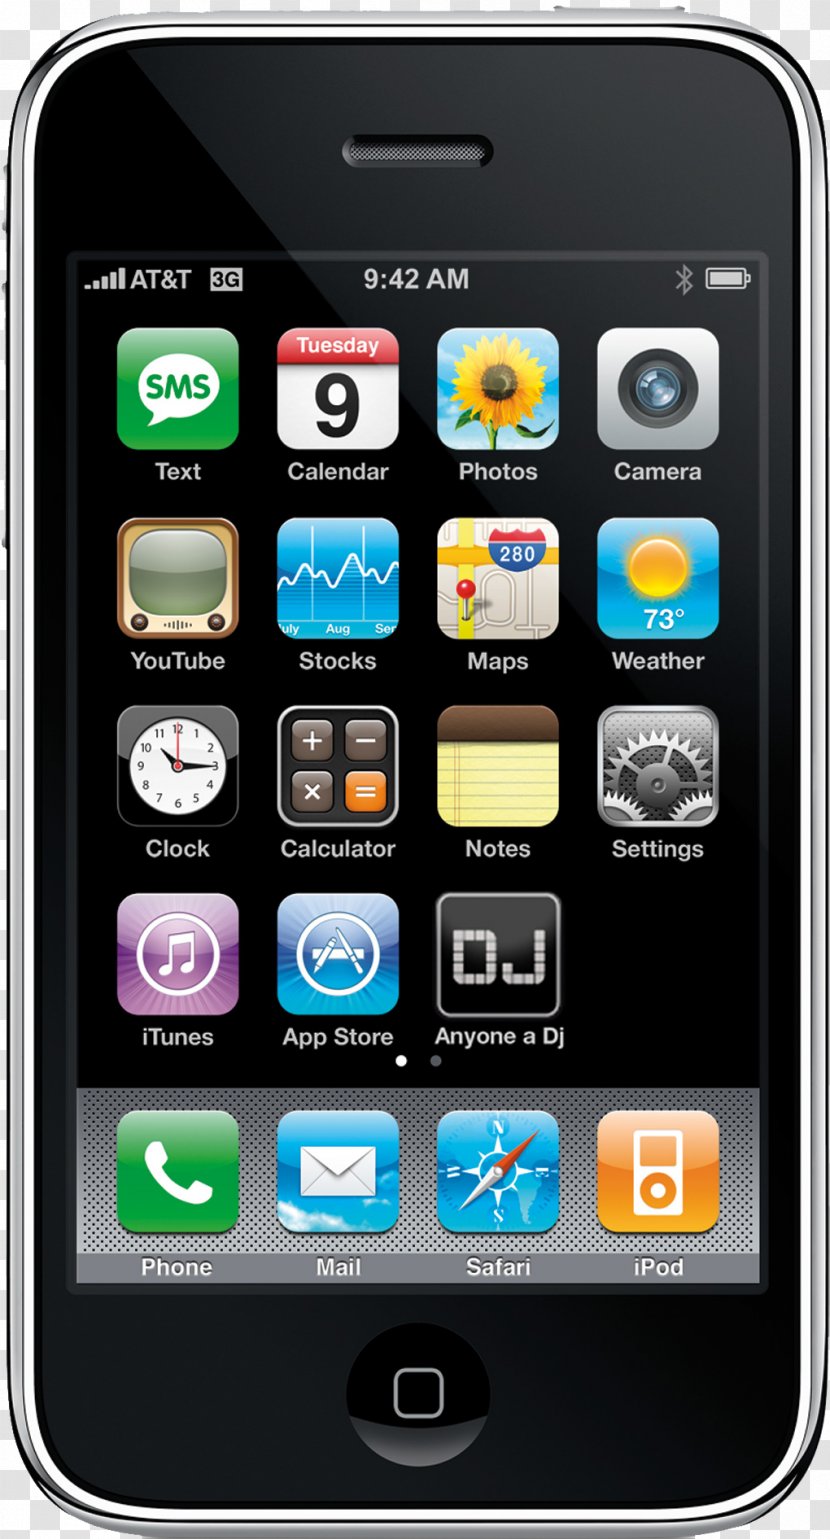 IPhone 3GS 4S 5s - Product Design - Apple Iphone Image Transparent PNG